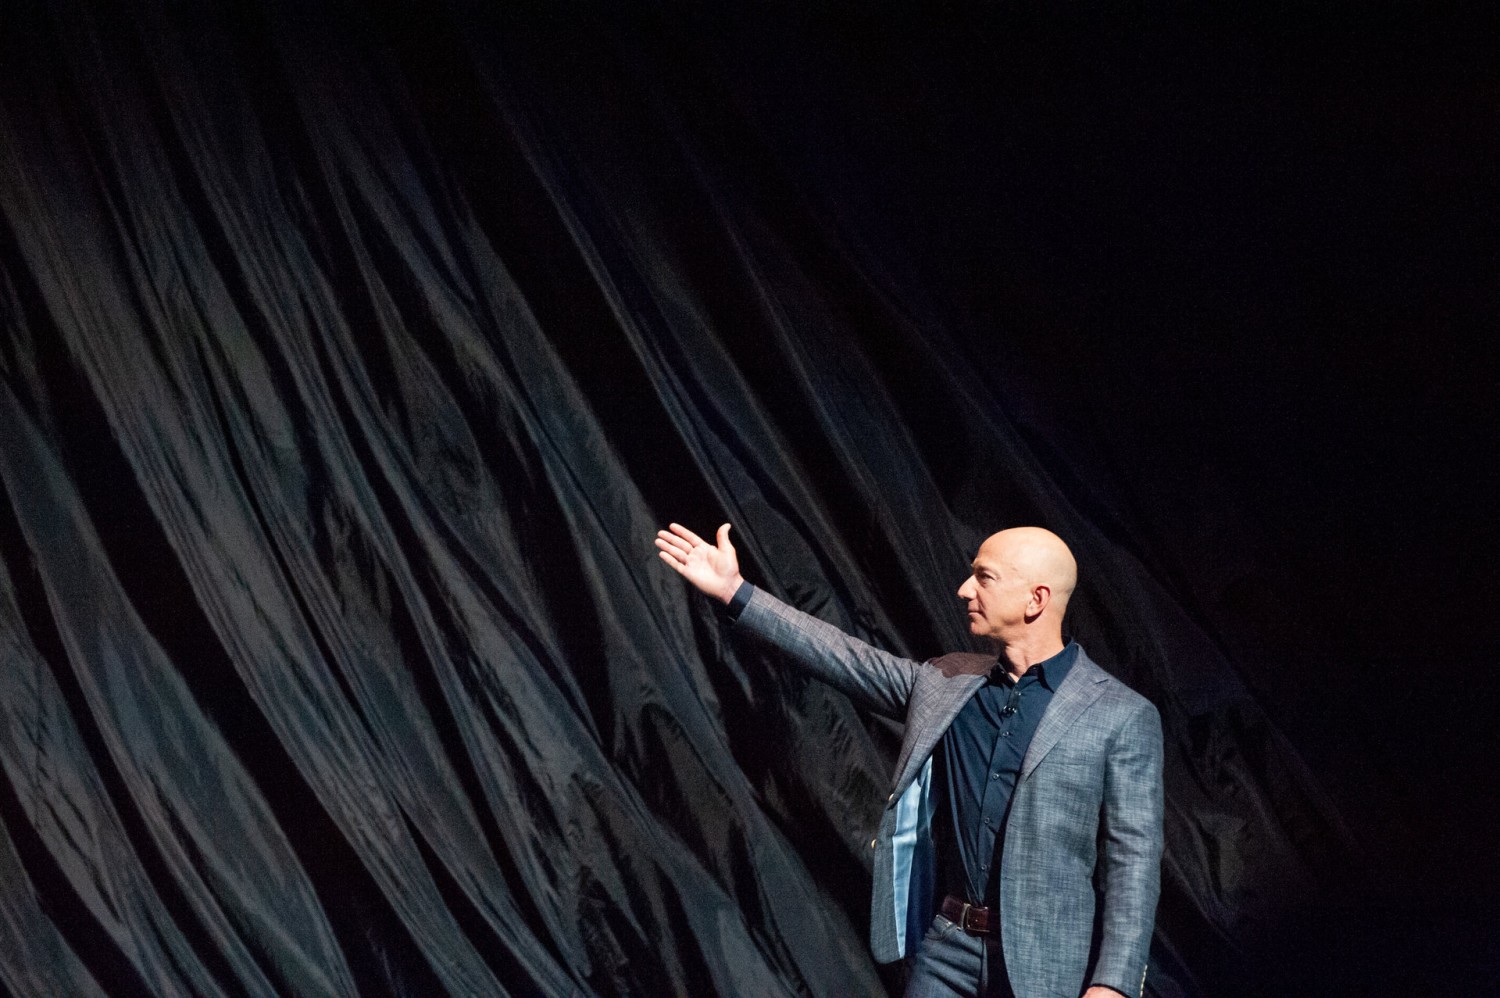 Jeff Bezos gestures while unveiling Blue Origin's lunar lander concept, called Blue Moon, on May 9, 2019. Dave Mosher/Business Insider